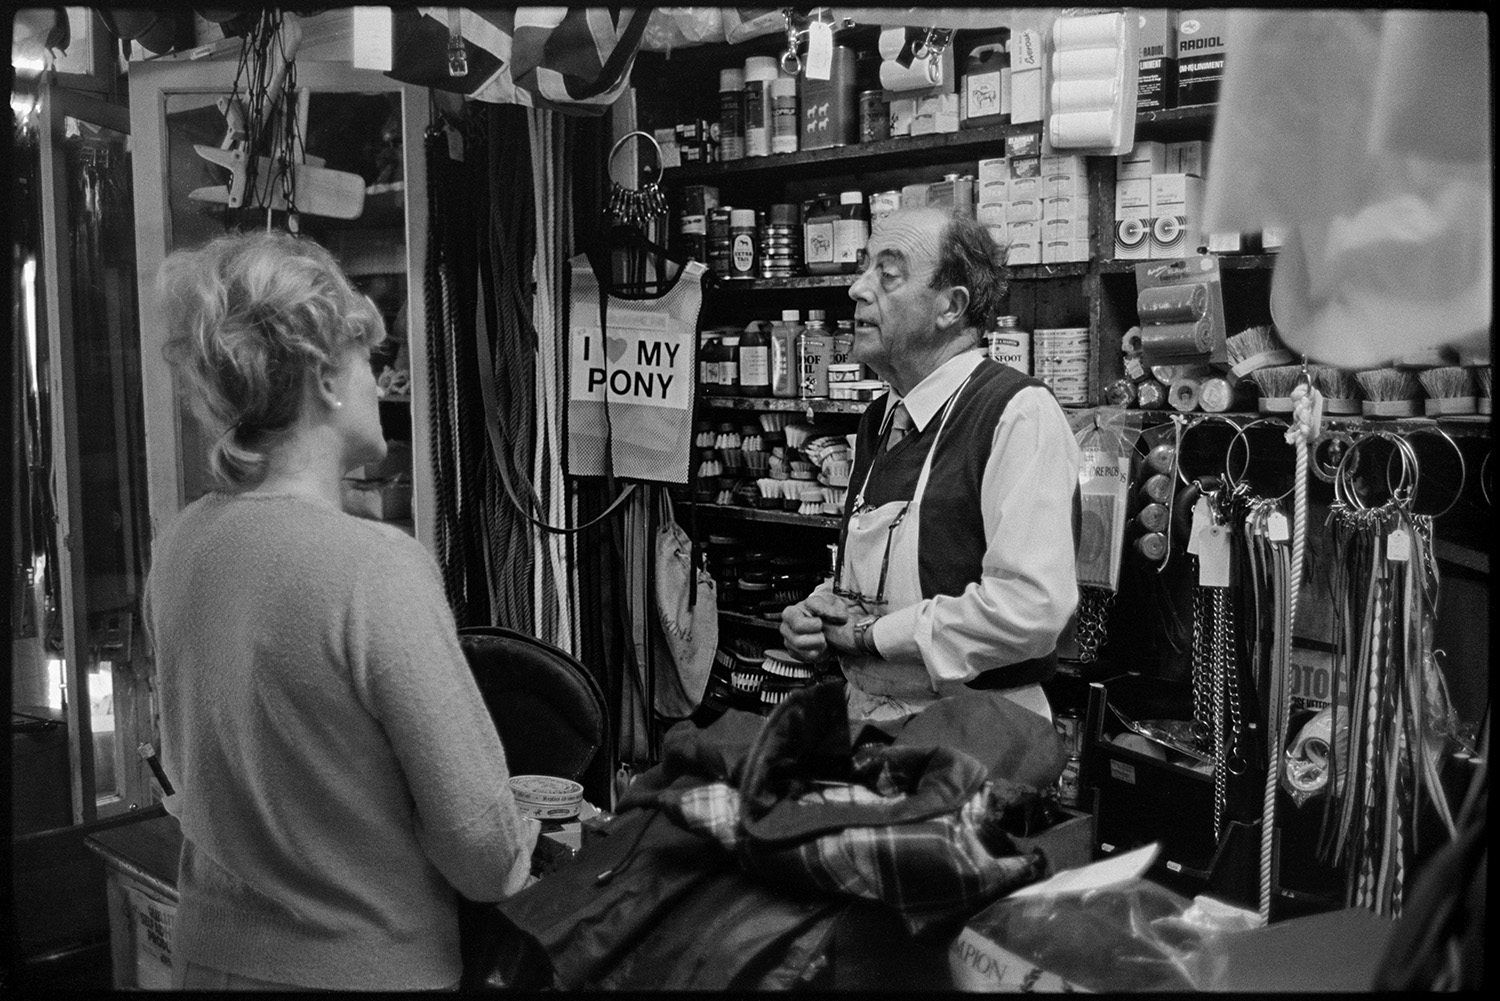 Saddlers shop, proprietor and customer. <br />
[Derek Johns serving a woman in his saddlers shop in Buttgarden Street, Bideford. Various good are on display behind the counter, including brushes, bottles, rollers and chains.]